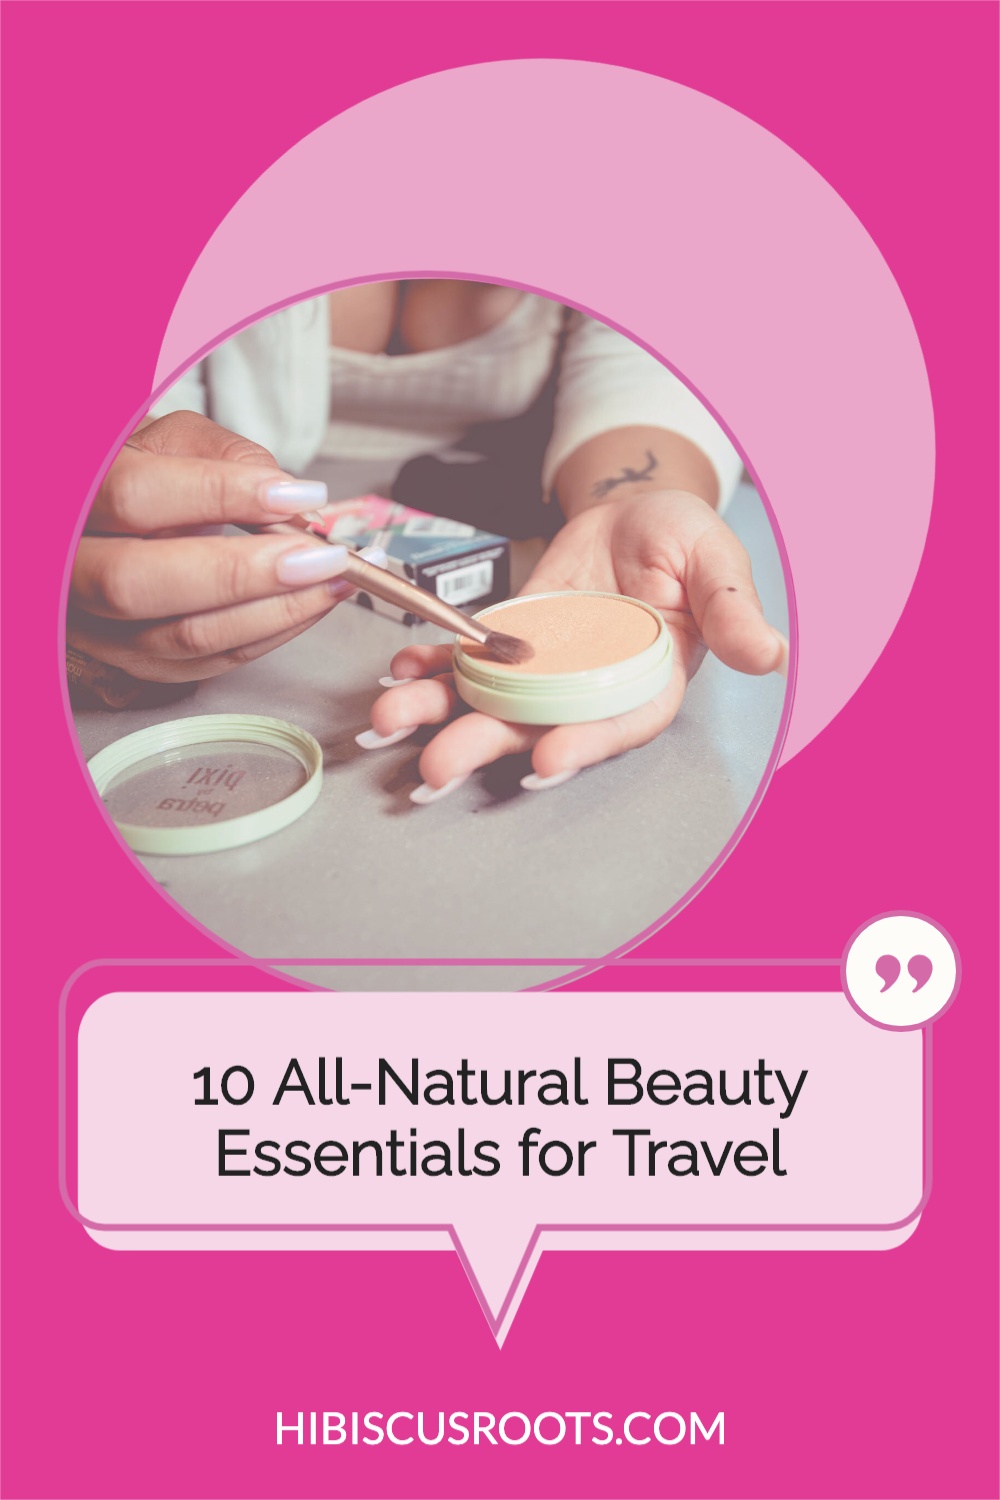 10 All-Natural Beauty Essentials for Travel